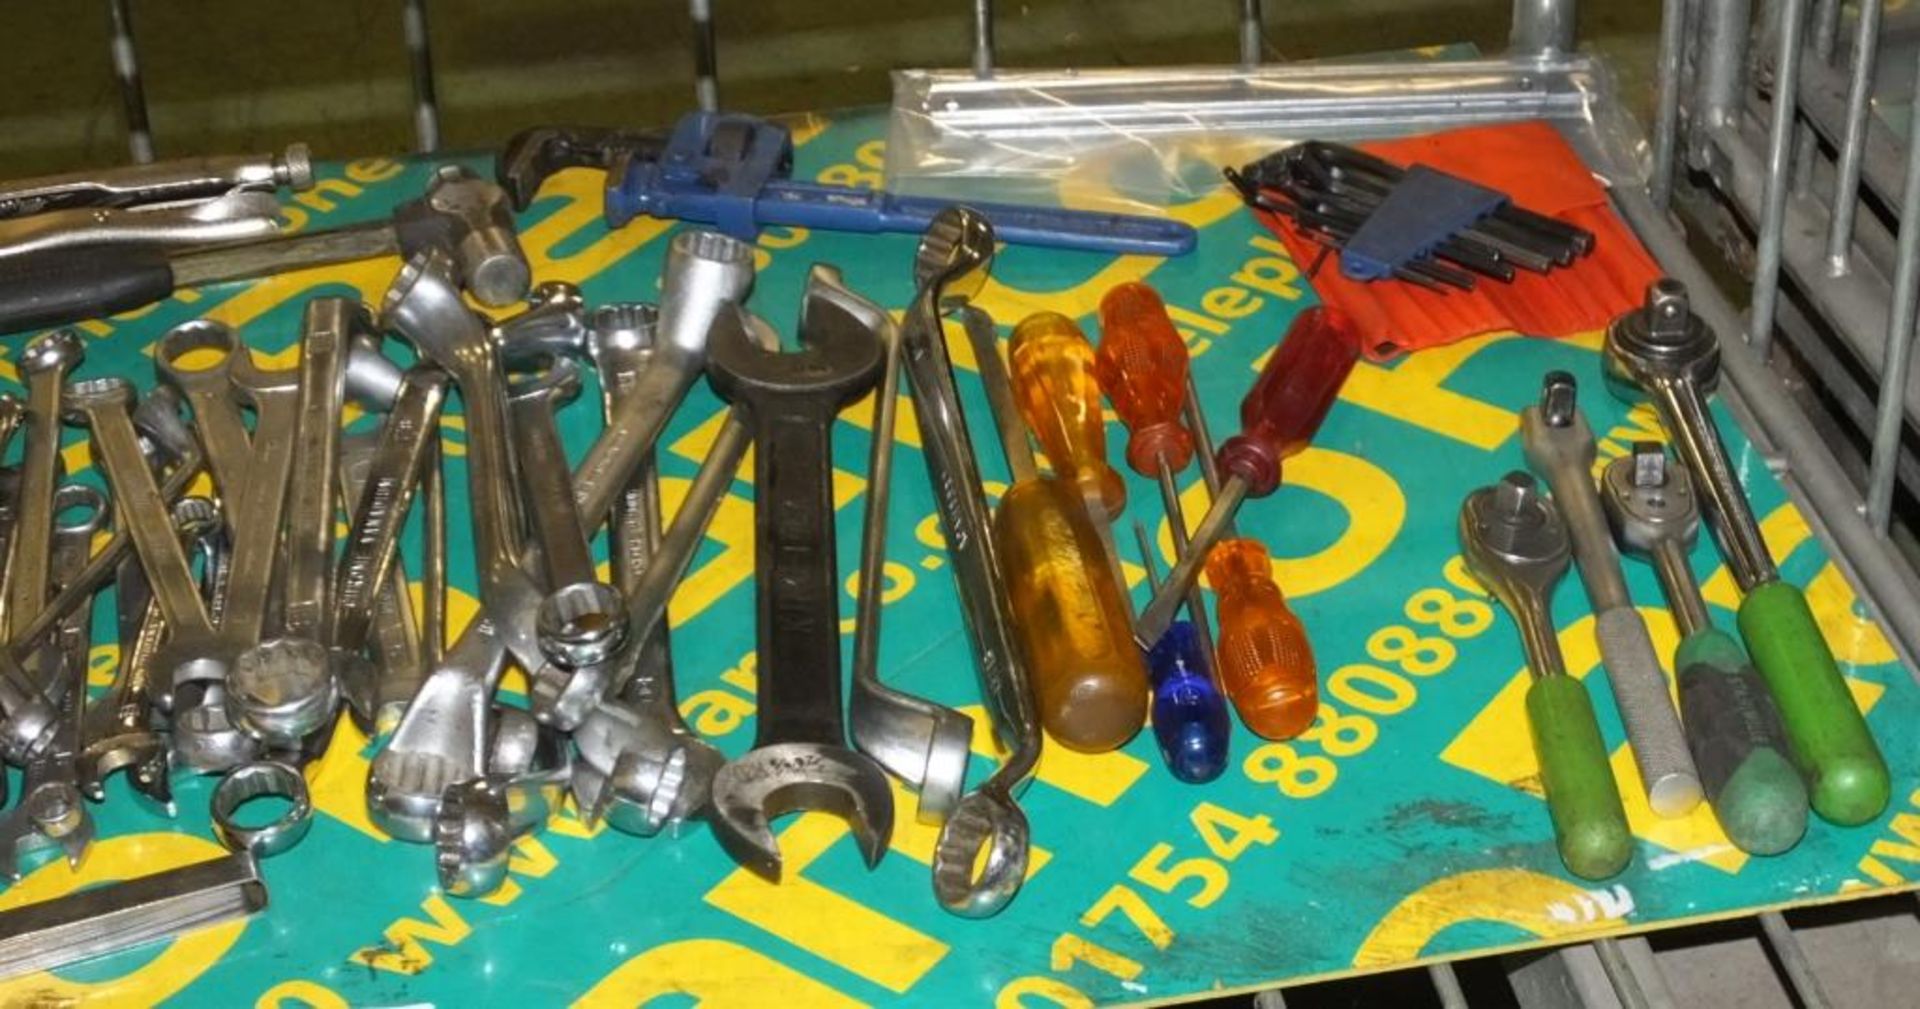 Various Hand Tools - Hammer, Sockets, Spanners, Wrenches - Image 3 of 3